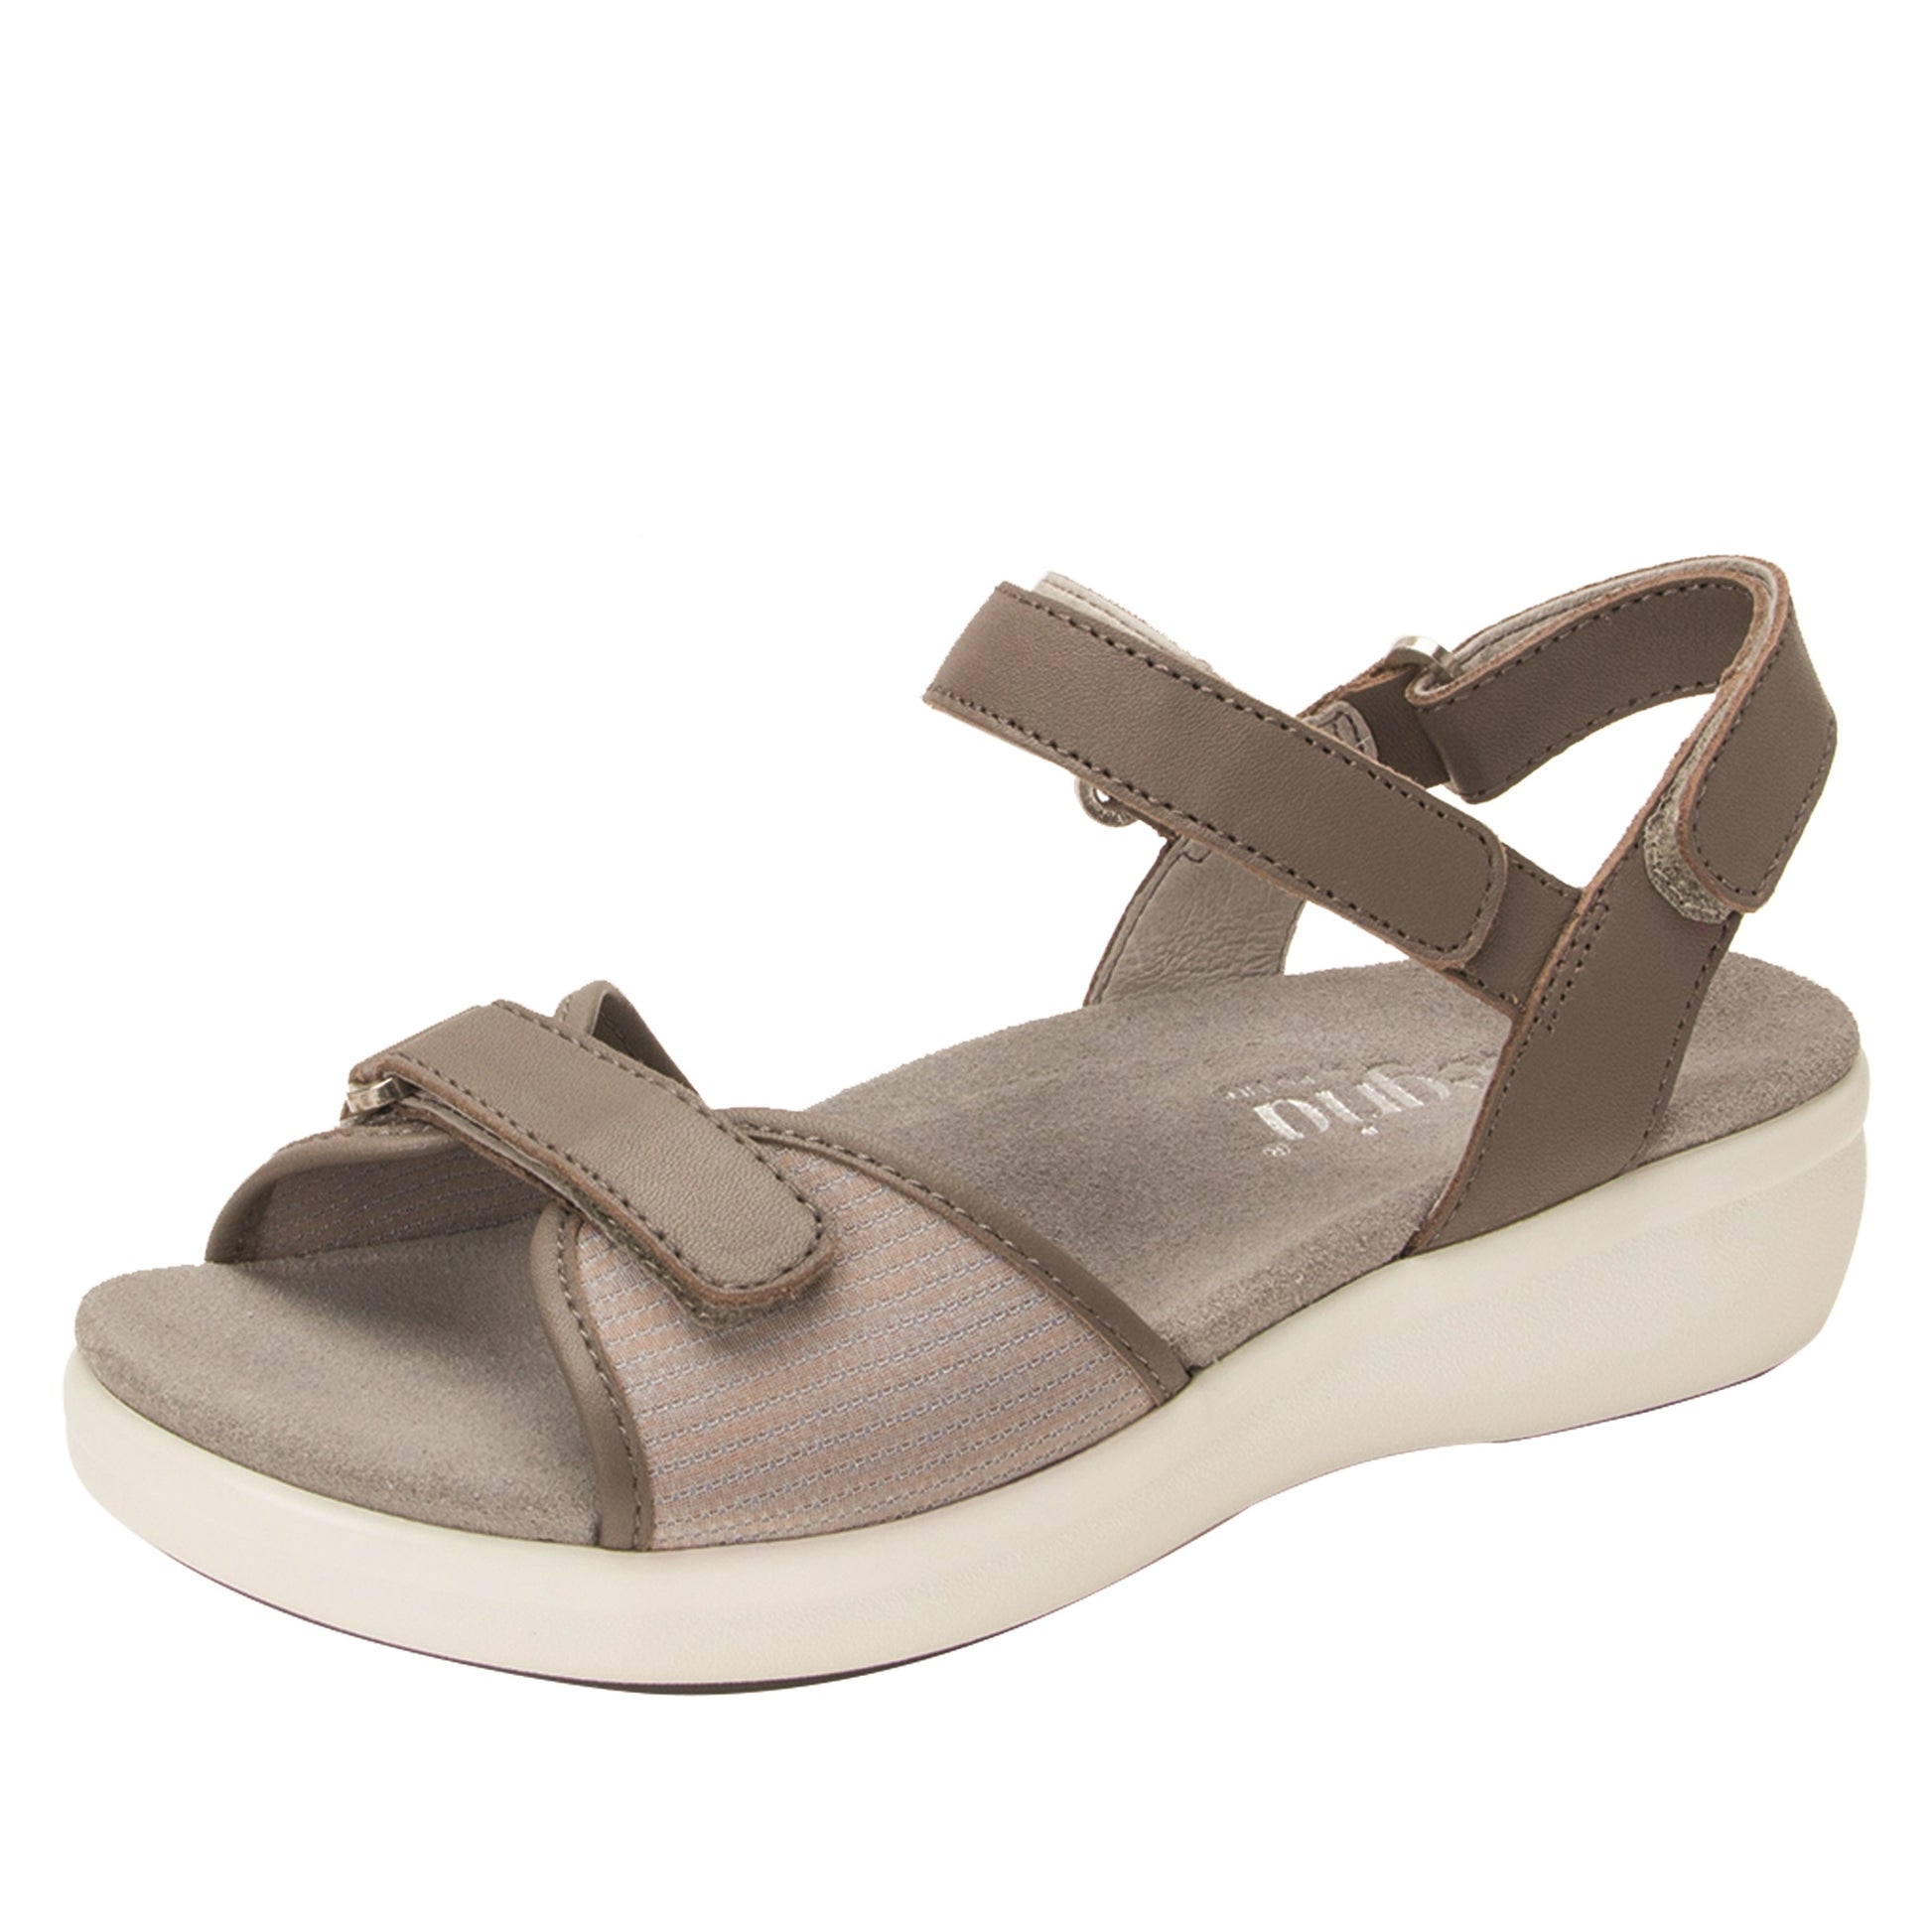 Traq Qali by Alegria Sale Shoe Sandal in Grey at Parker's Clothing and Shoes.